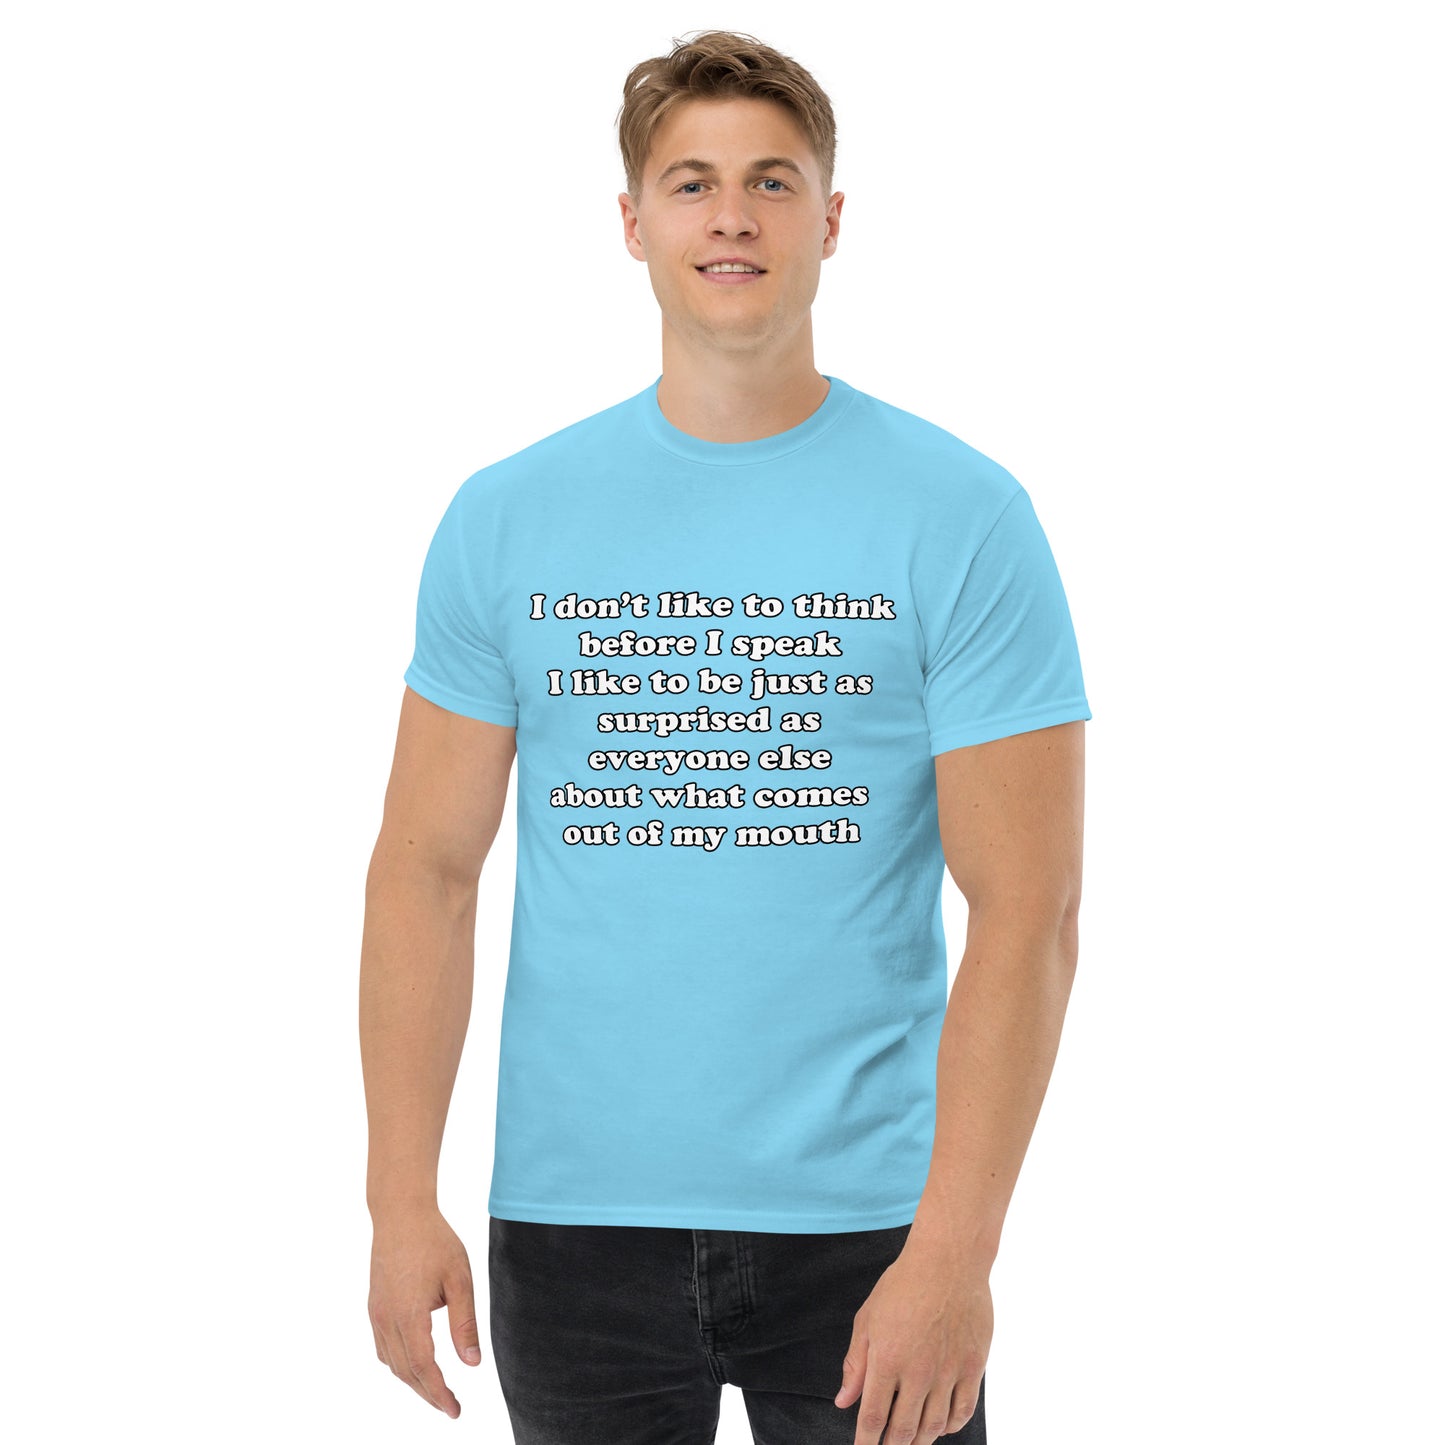 Man with sky blue t-shirt with text “I don't think before I speak Just as serprised as everyone about what comes out of my mouth"